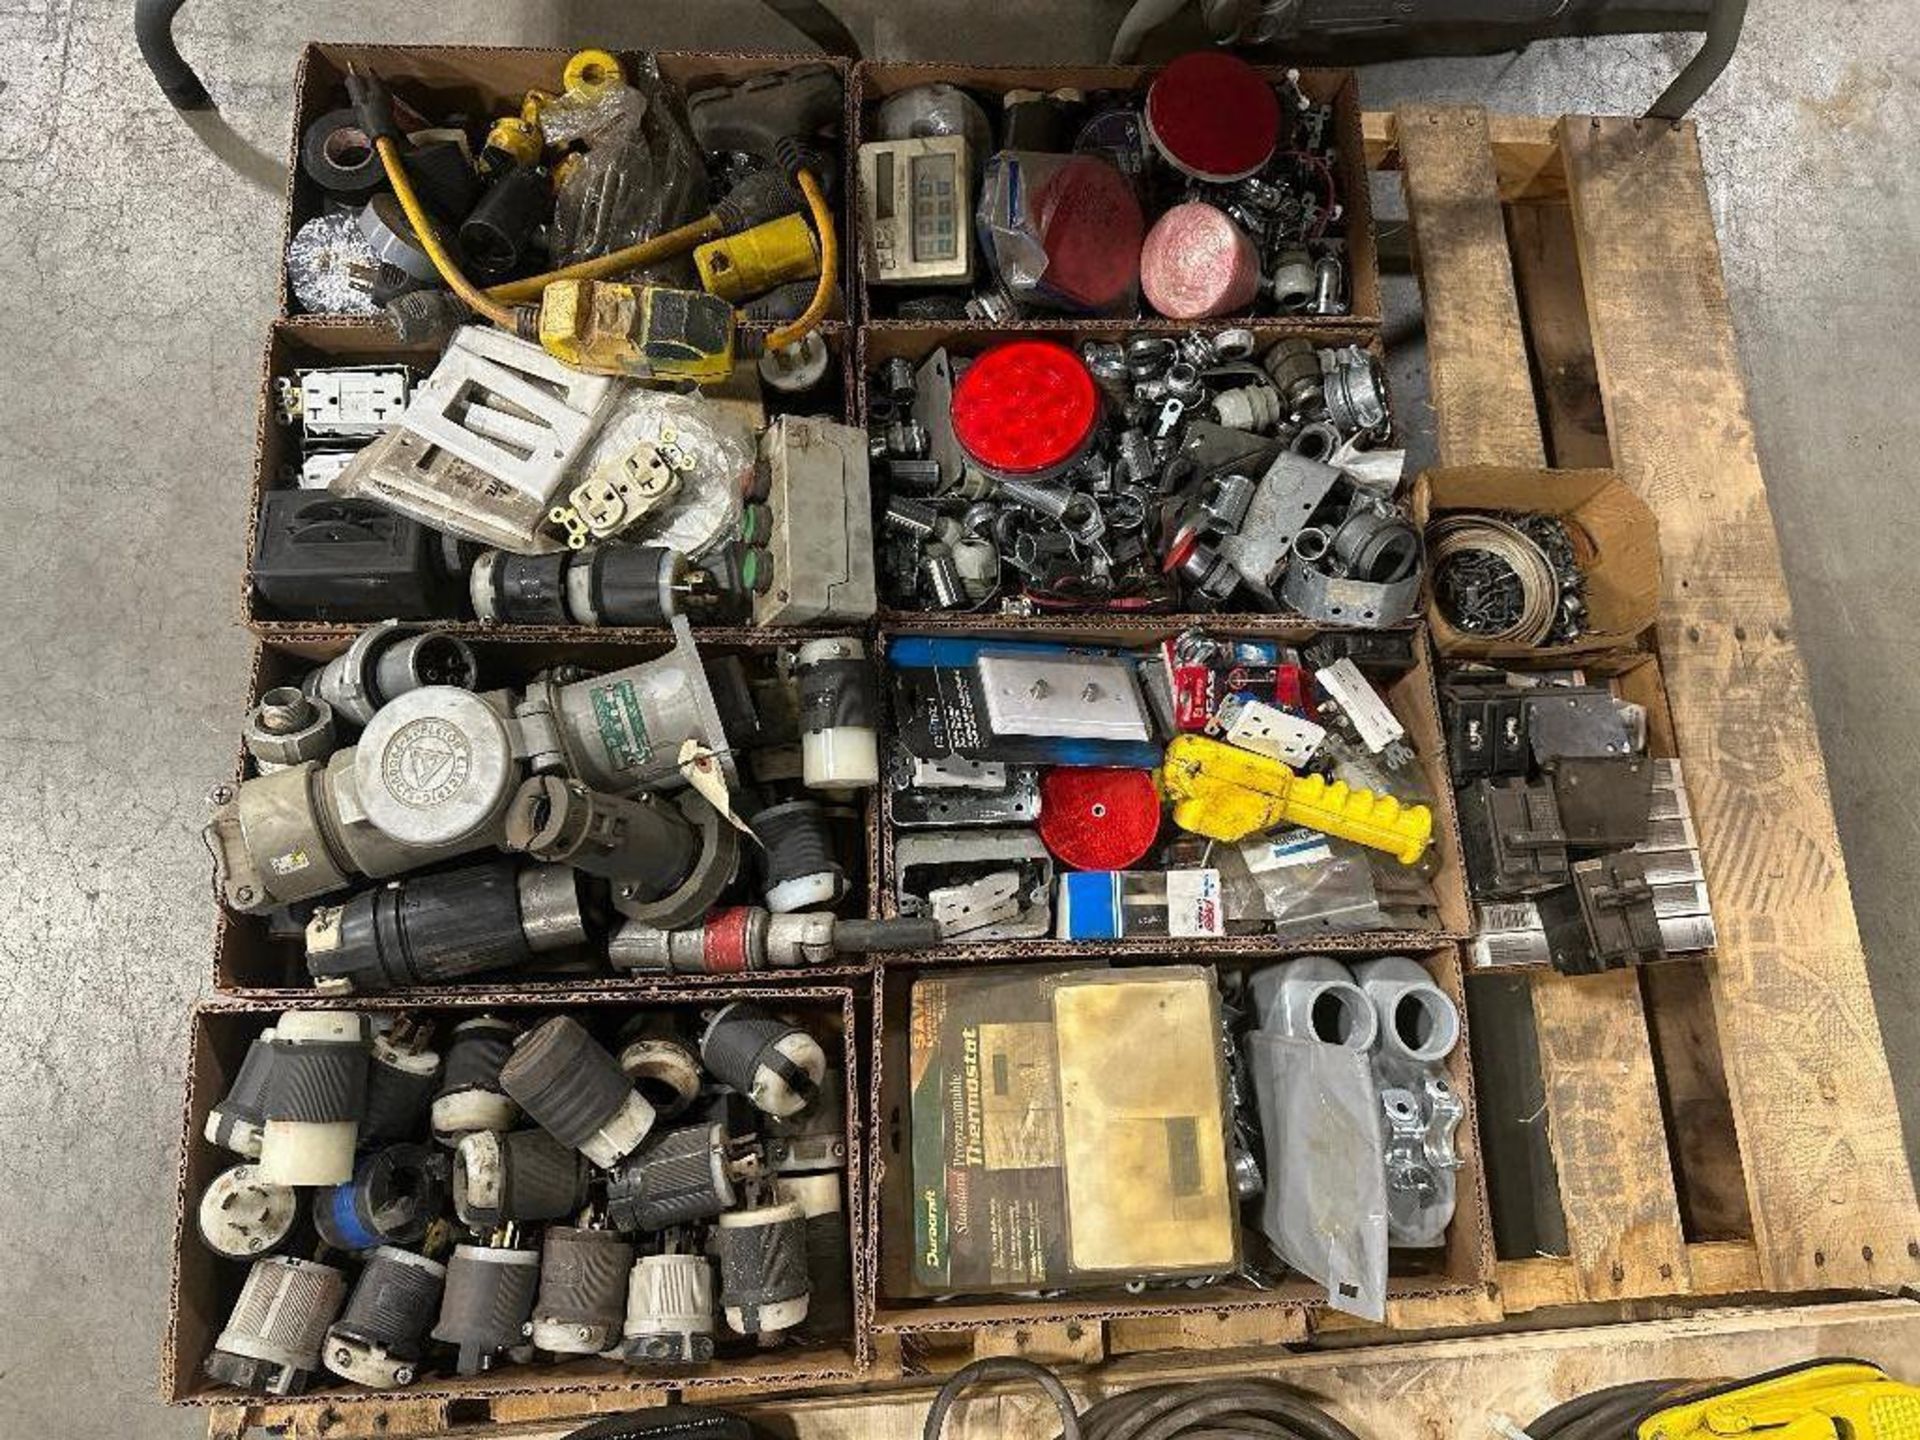 Pallet of Asst. electrical Components including Outlets, Cord Ends, Lights, Breakers, etc.